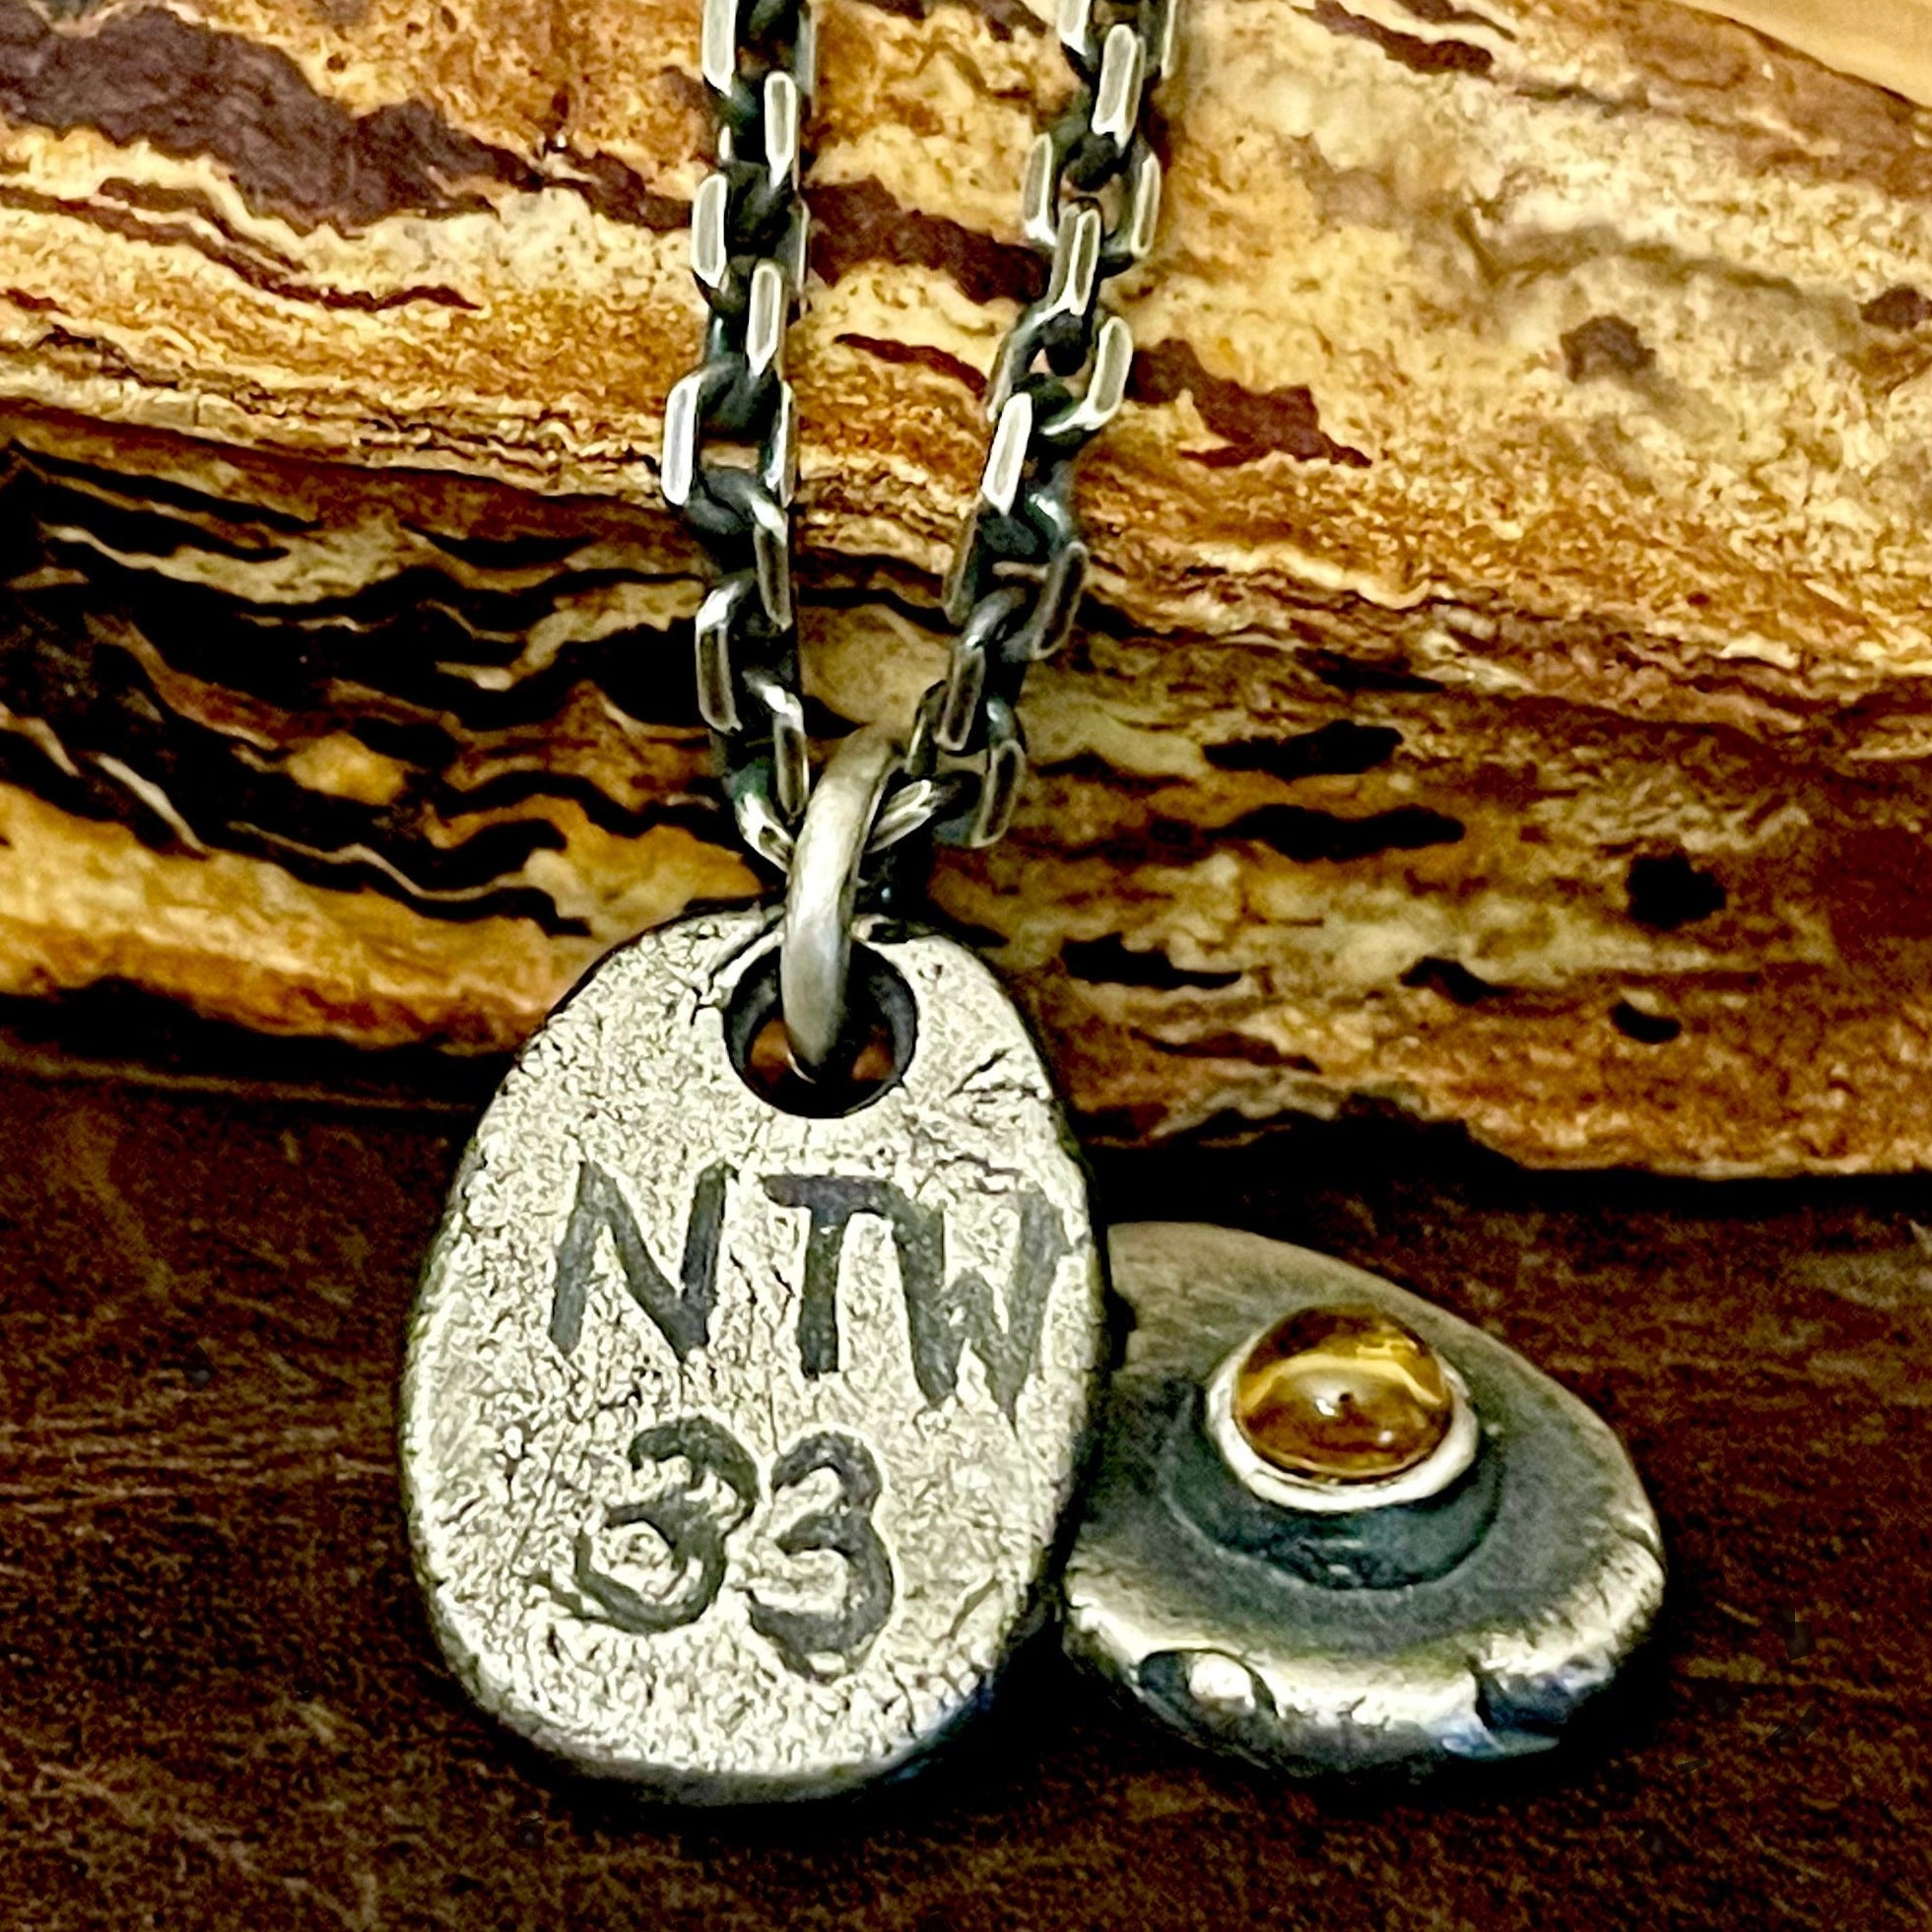 Rustic silver birthstone pendant with initials and number